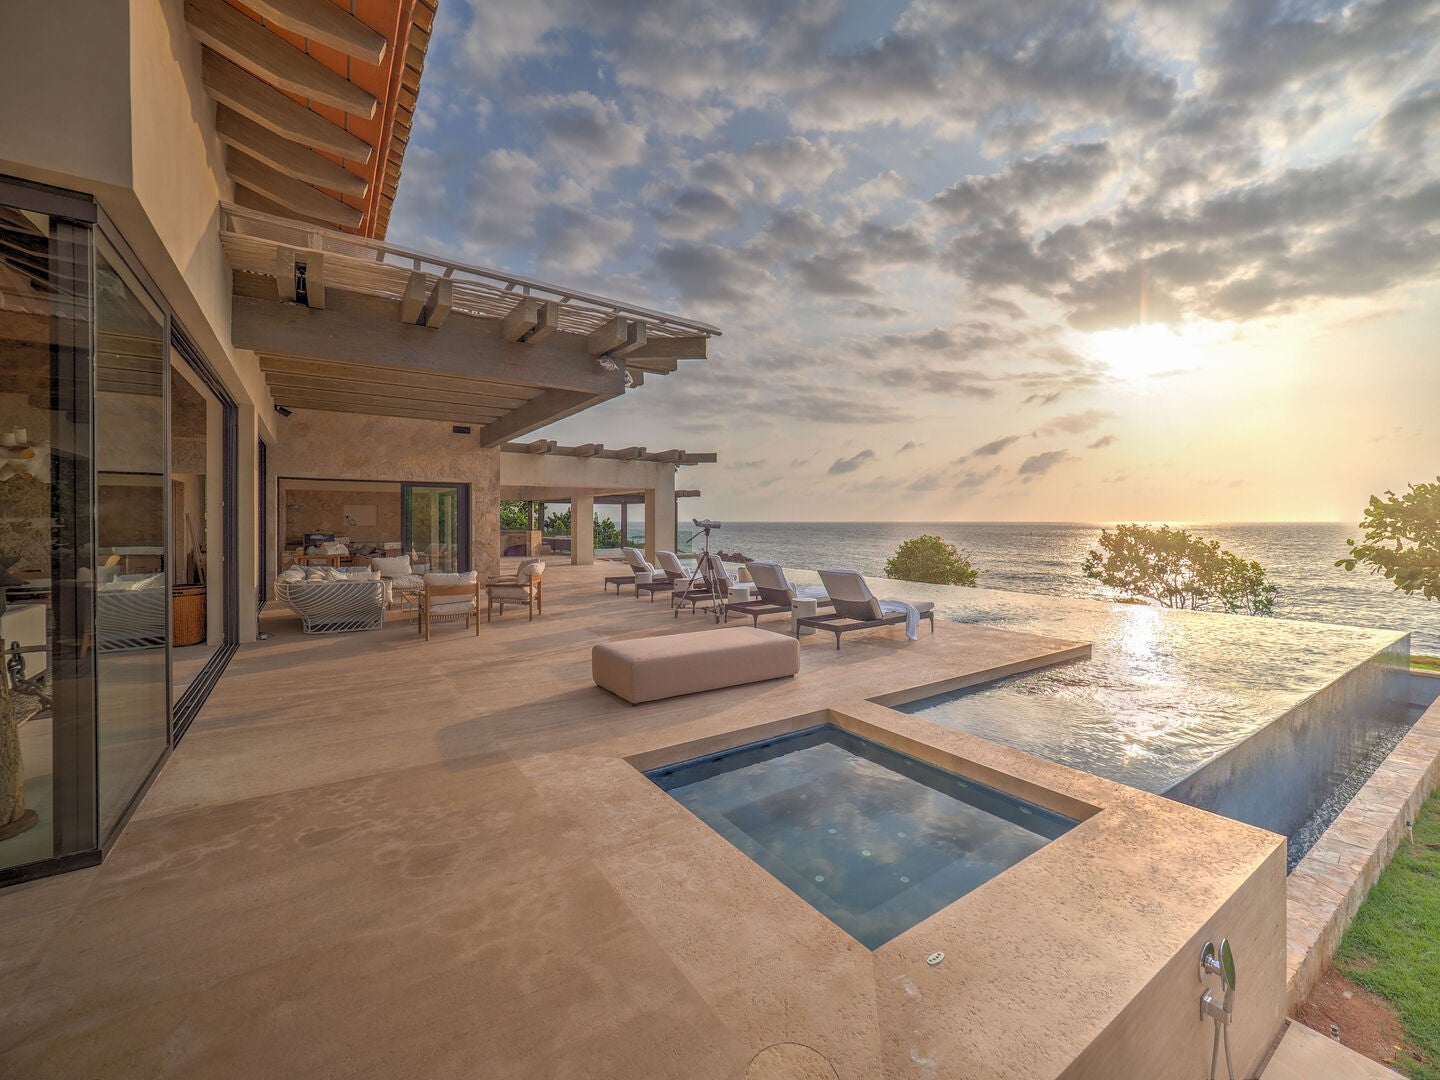 I Experienced Casa Tesoro, Punta Mita’s Little Slice Of Luxury Along Mexico’s Pacific Coast. Here’s Why I Can’t Stop Thinking About It